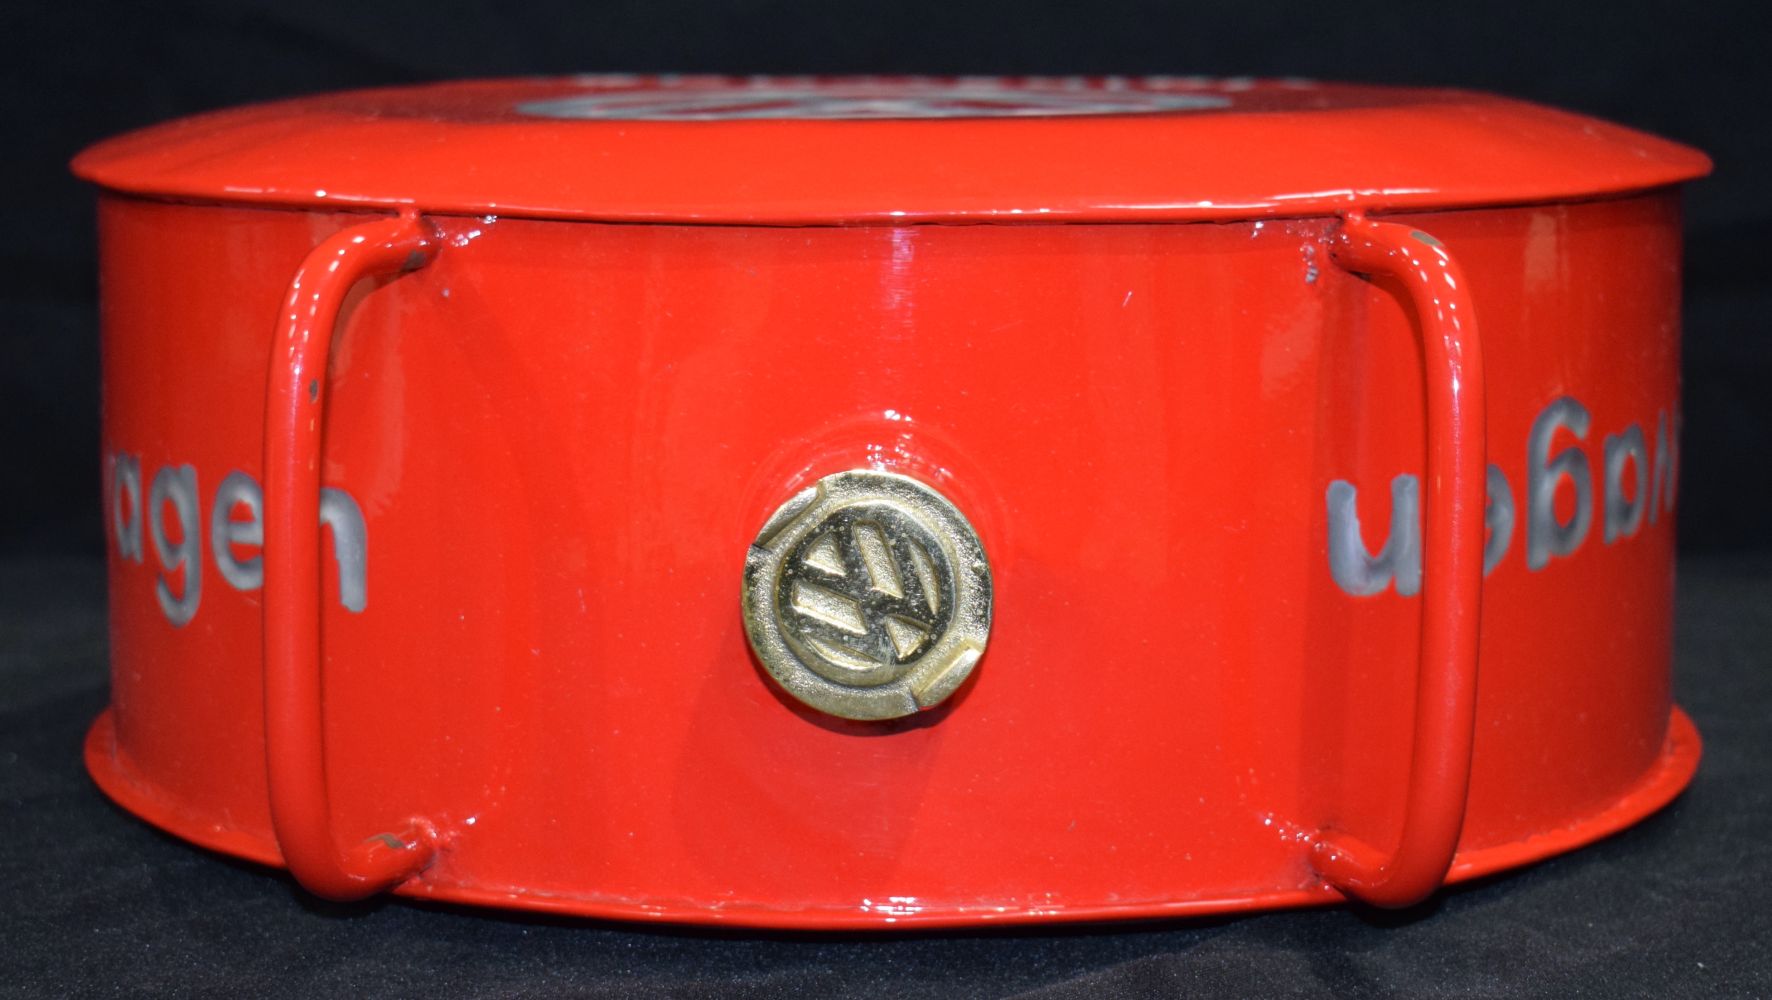 A Red Volkswagen oil can 36 x 36 cm - Image 6 of 6